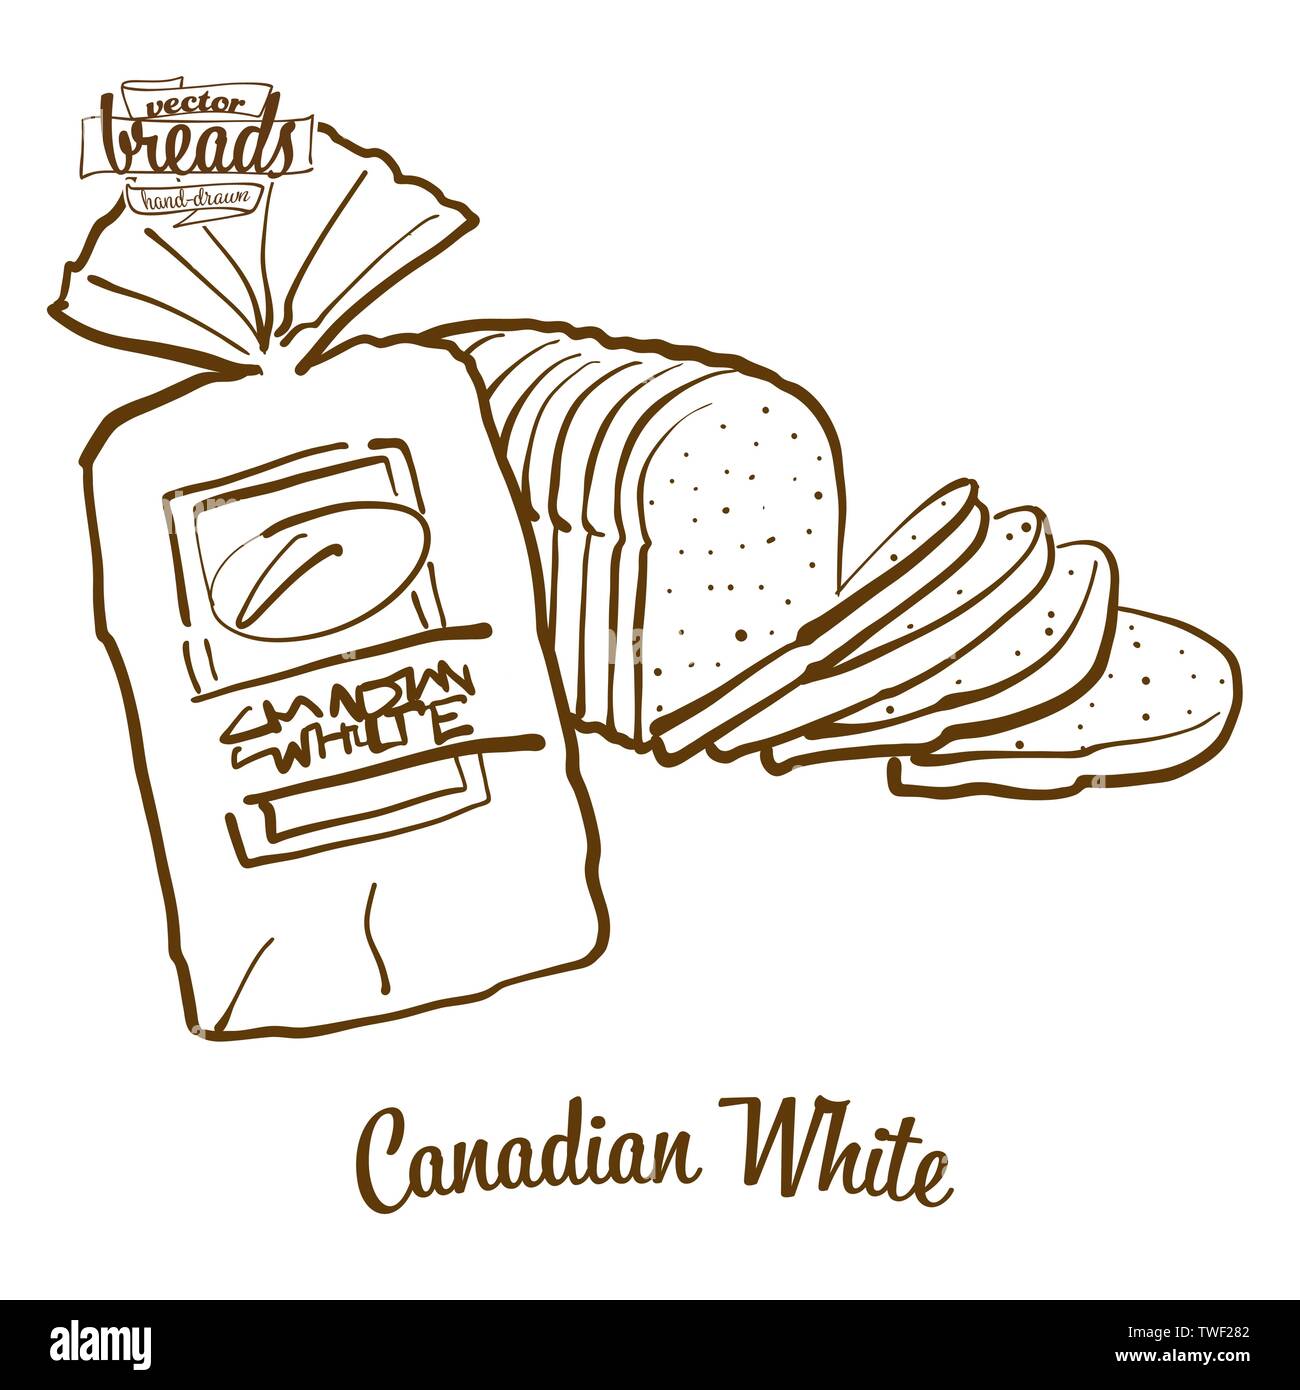 Canadian White bread vector drawing. Food sketch of White, usually known in Canada. Bakery illustration series. Stock Vector